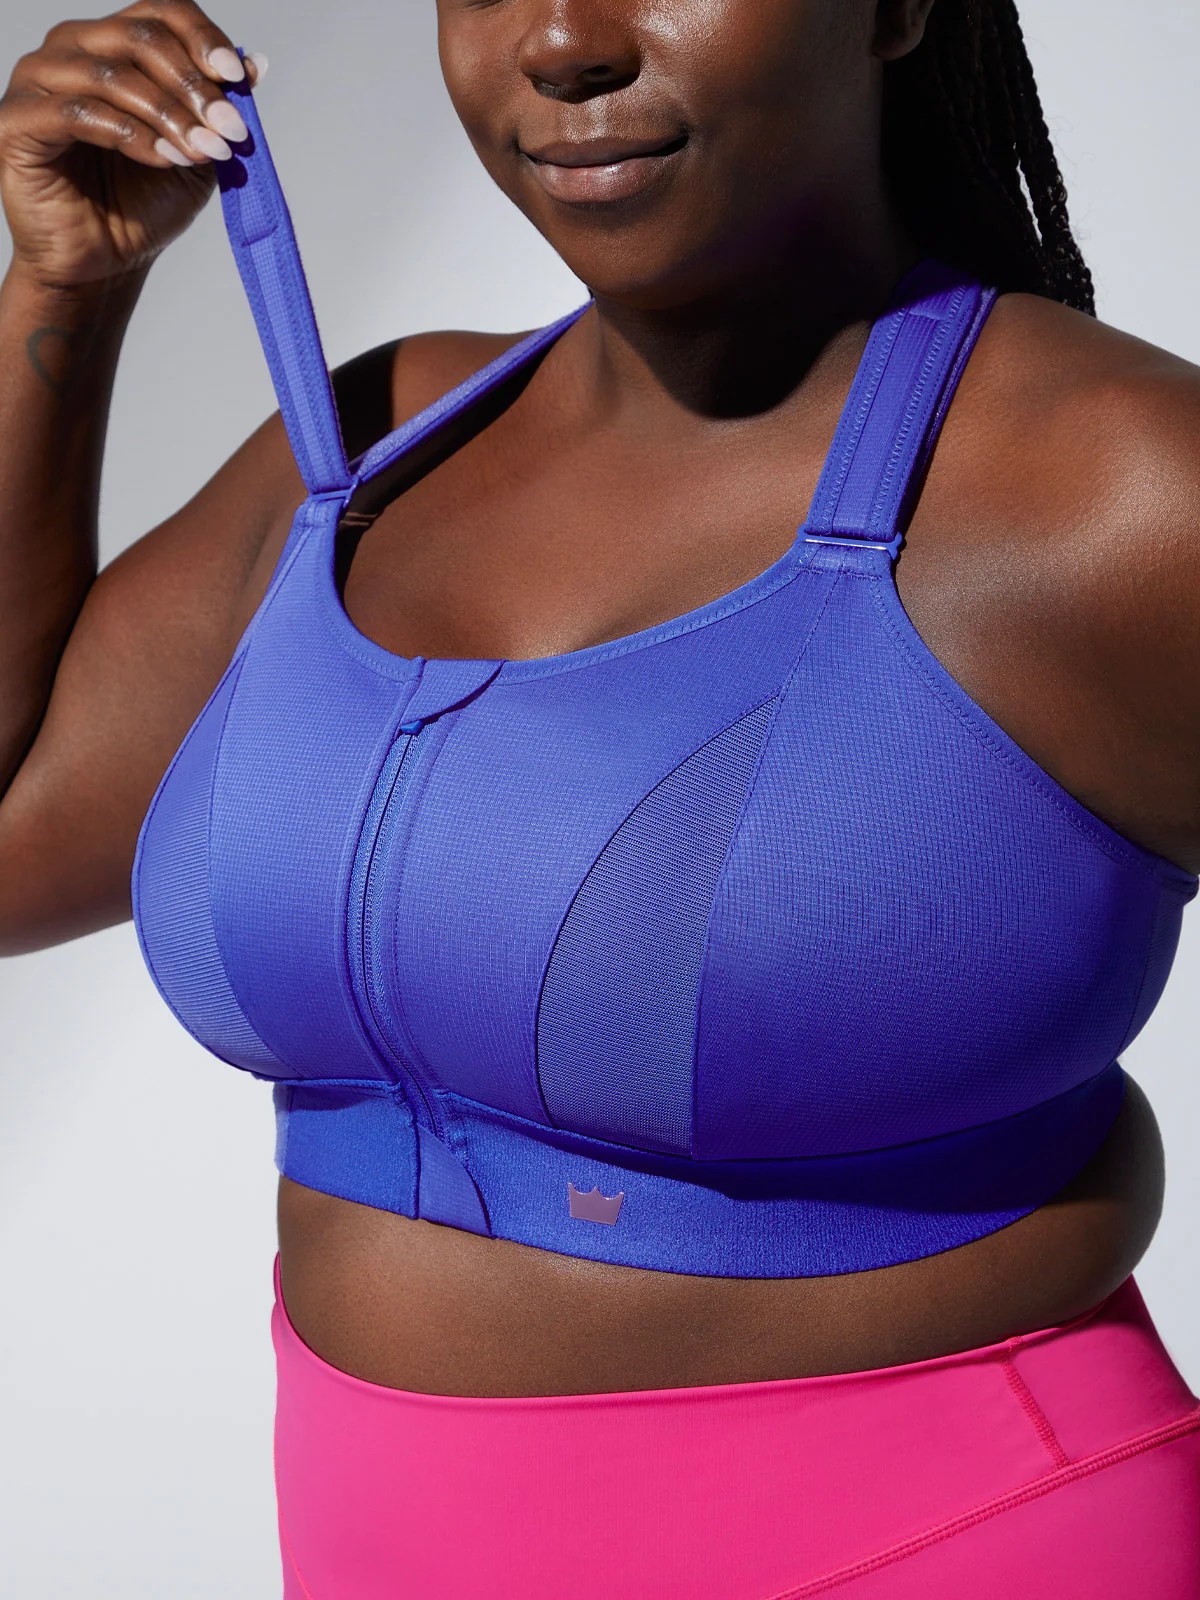 SHEFIT Pink Ultimate High Impact Sports Bra Size XL - $50 - From